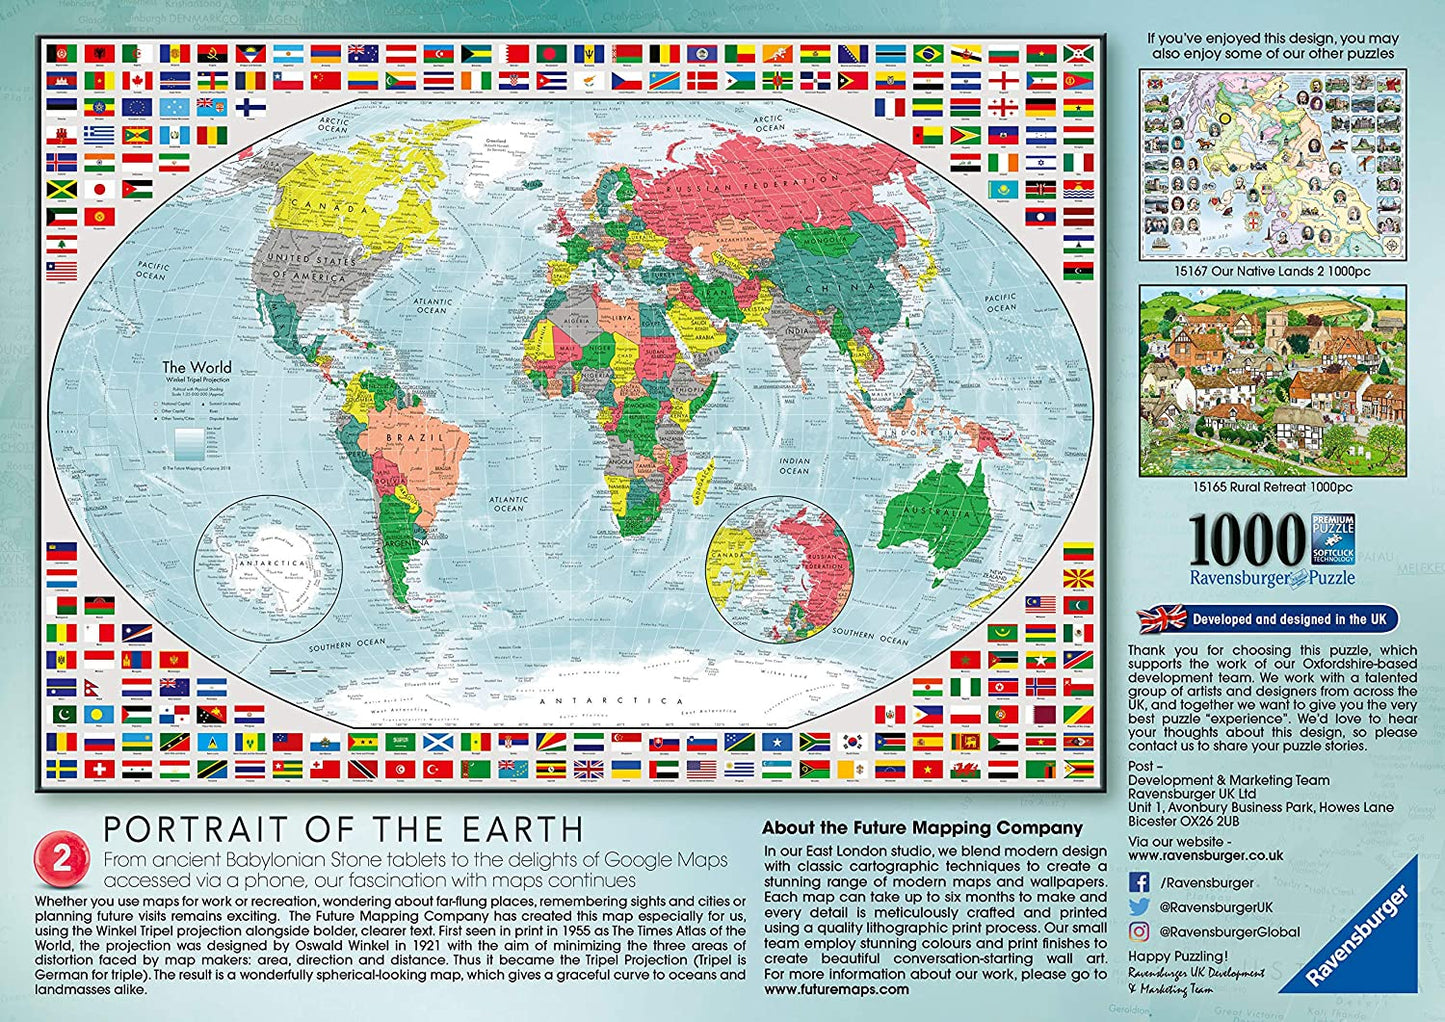 Ravensburger - Portrait of The Earth 2 - 1000 Piece Jigsaw Puzzle